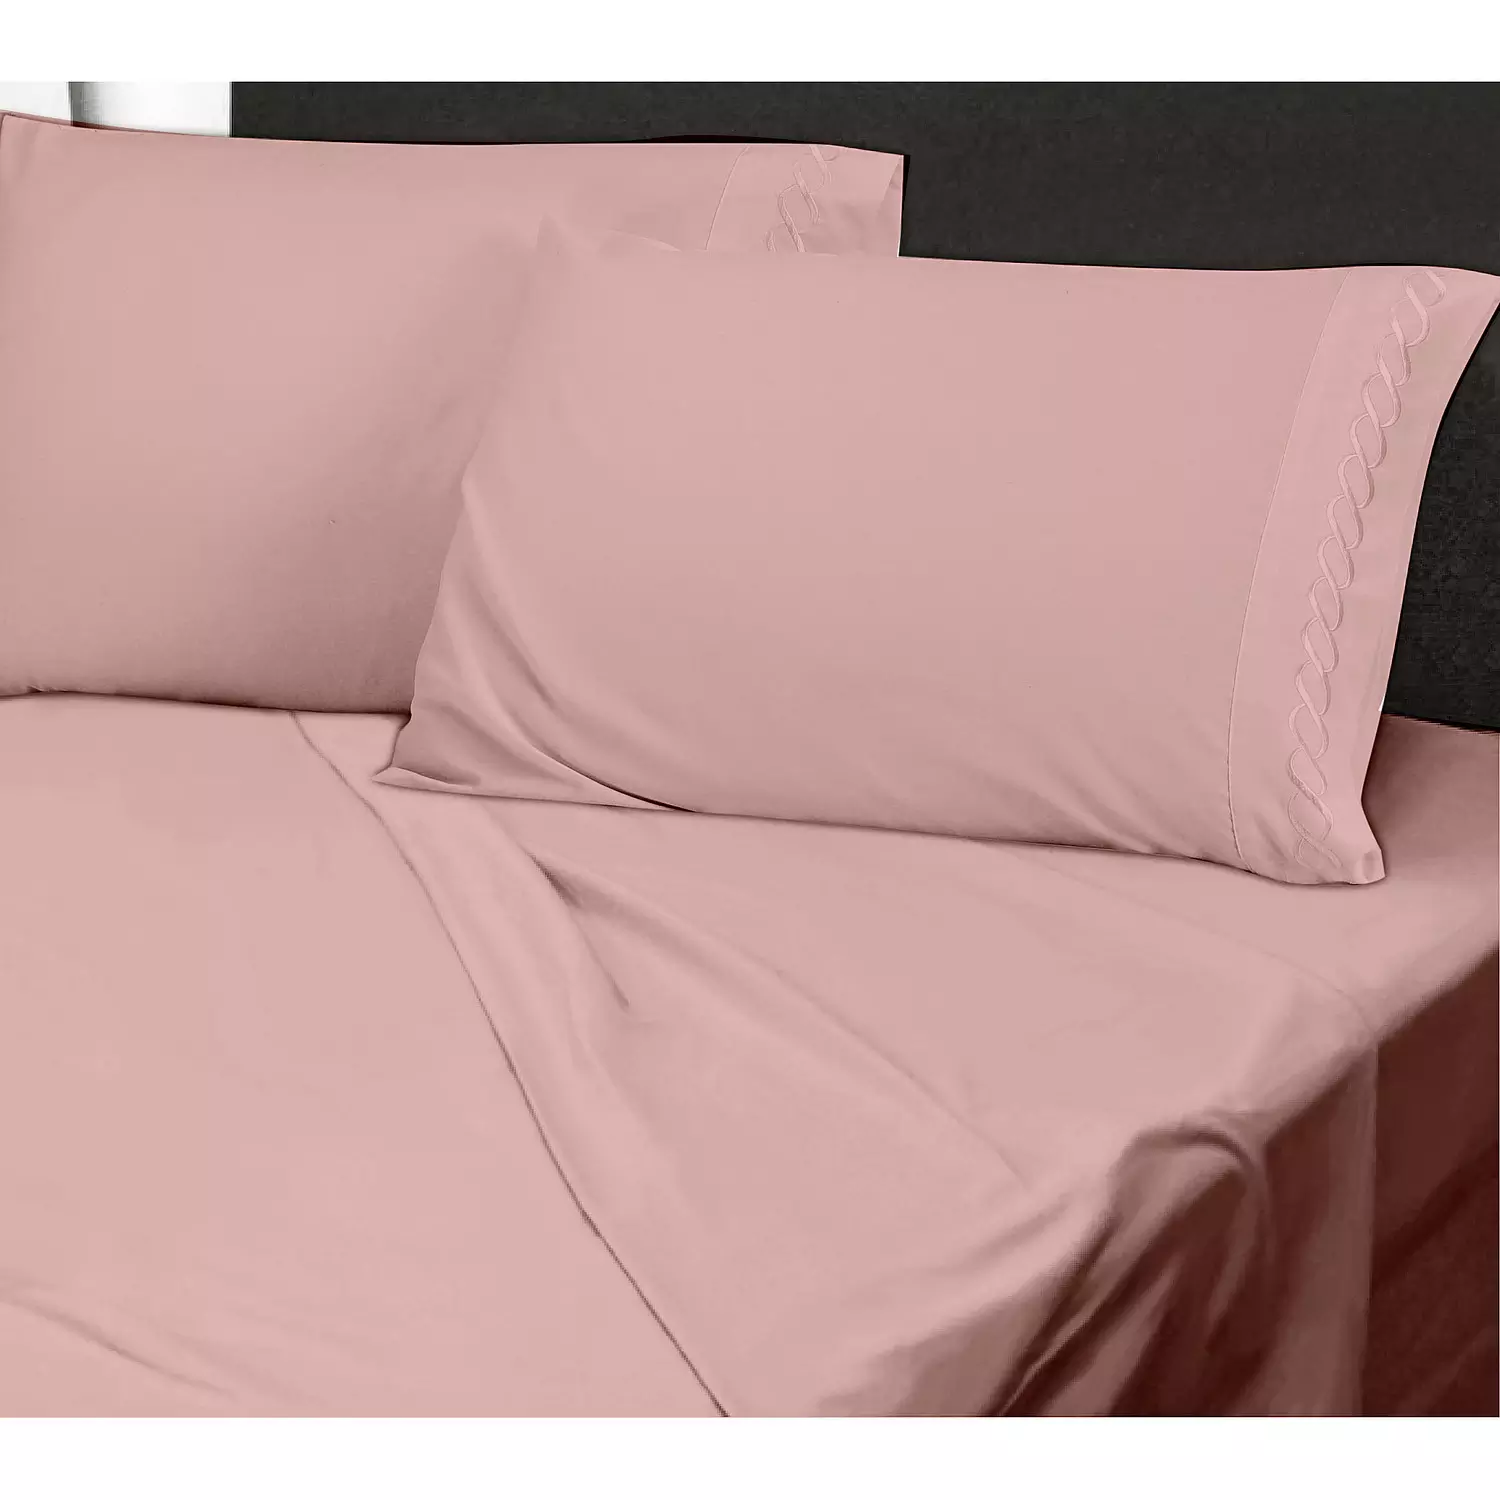 Mercure, sheet set with embroided helix detail, king, pink